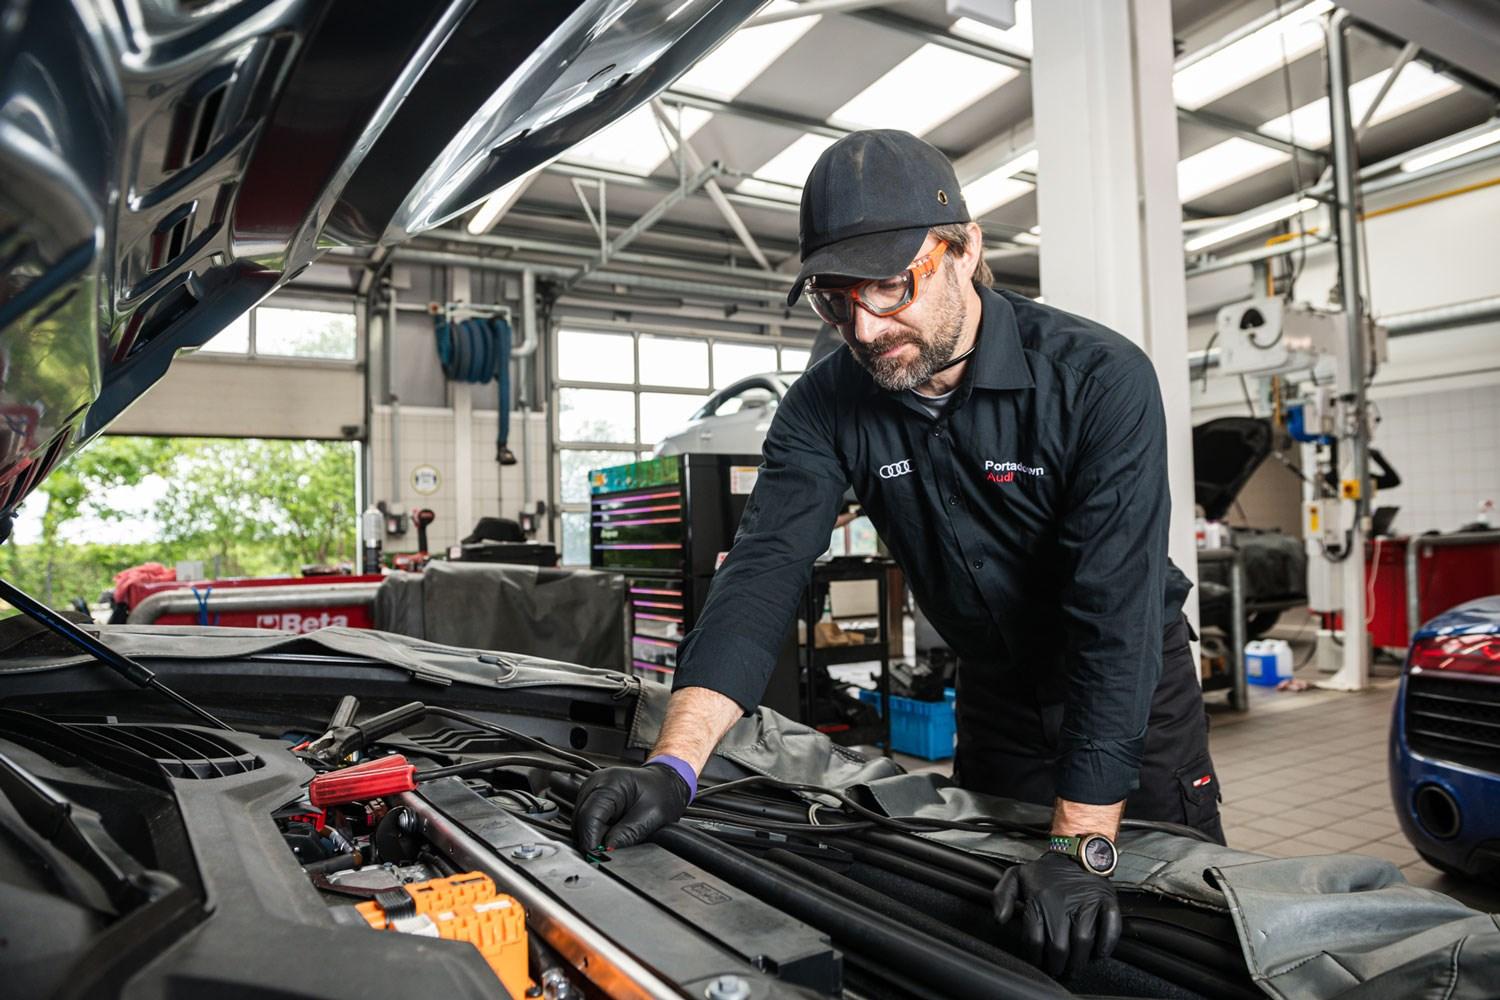 Audi Repair Specialist has the hood up of an Audi A3 while they do a brake fluid change at the Audi Repair Centre in Portadown Audi